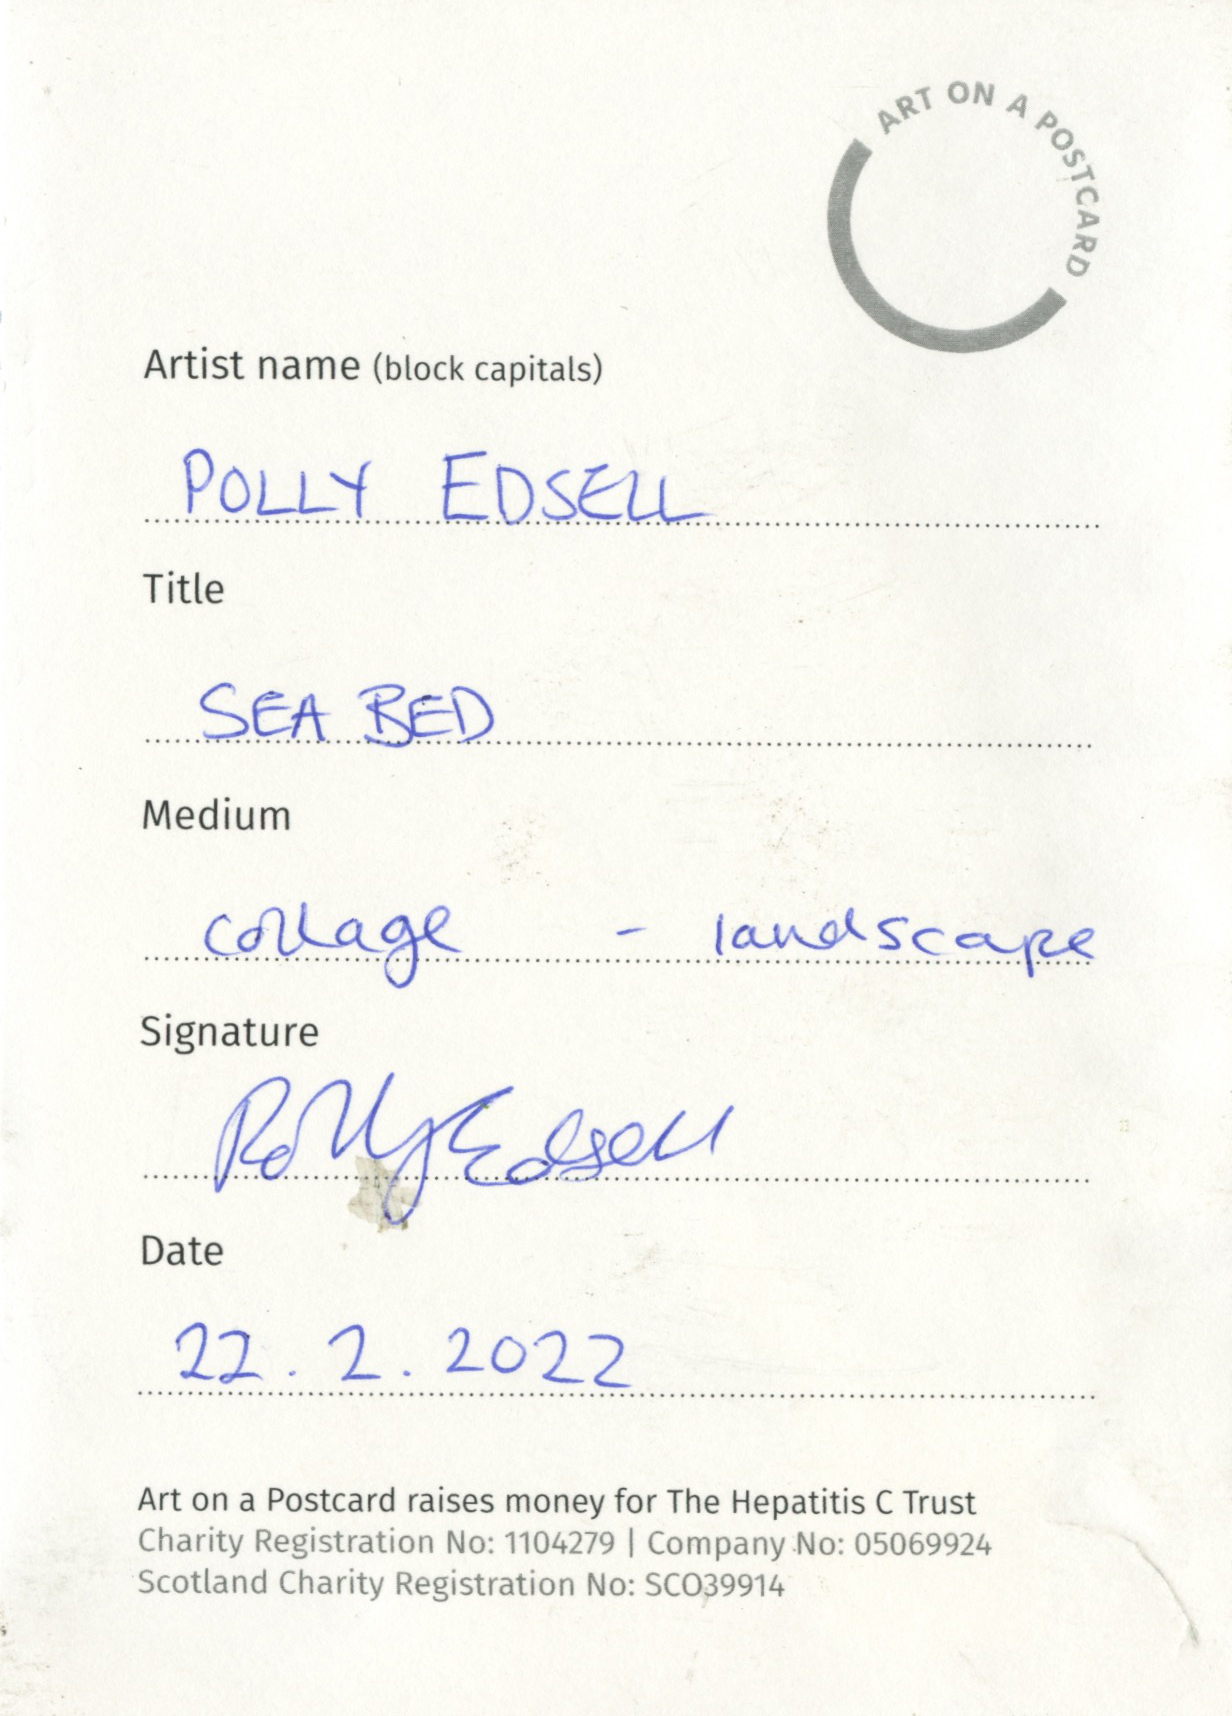 17. Polly Edsell - Sea Bed - BACK